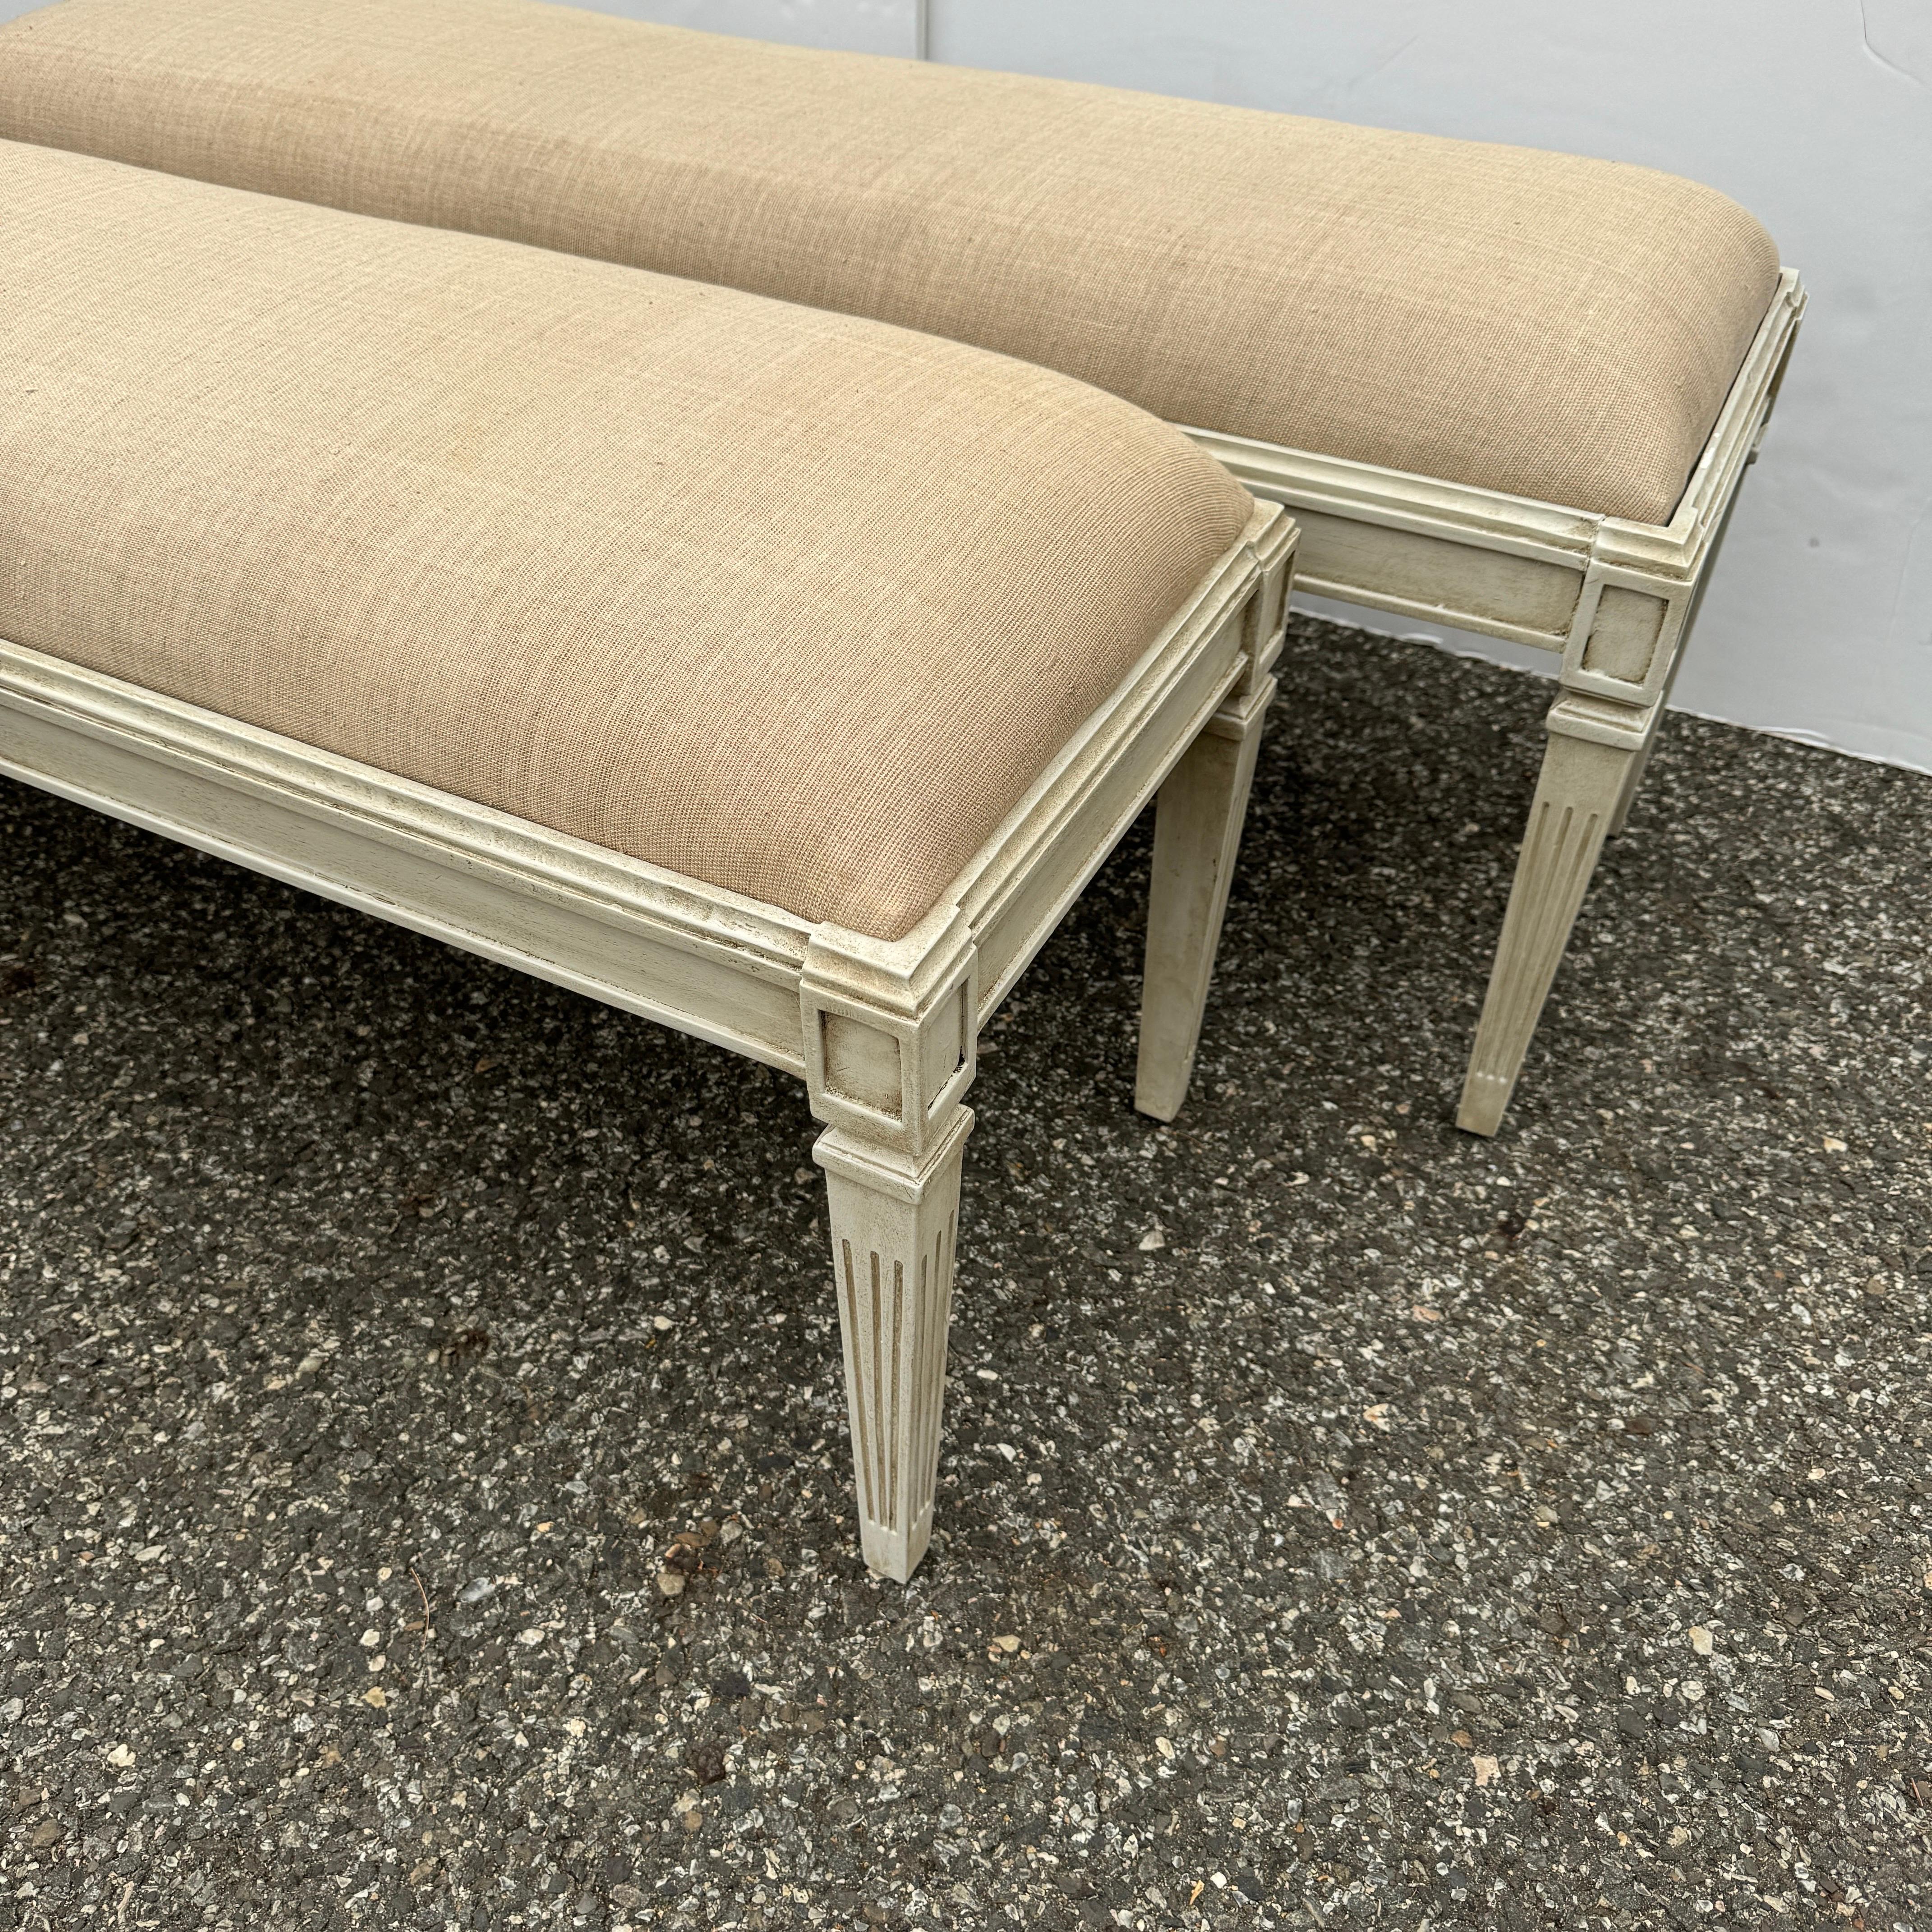 Pair Of Wide Painted Upholstered Benches in Swedish Gustavian Style In Good Condition For Sale In Haddonfield, NJ